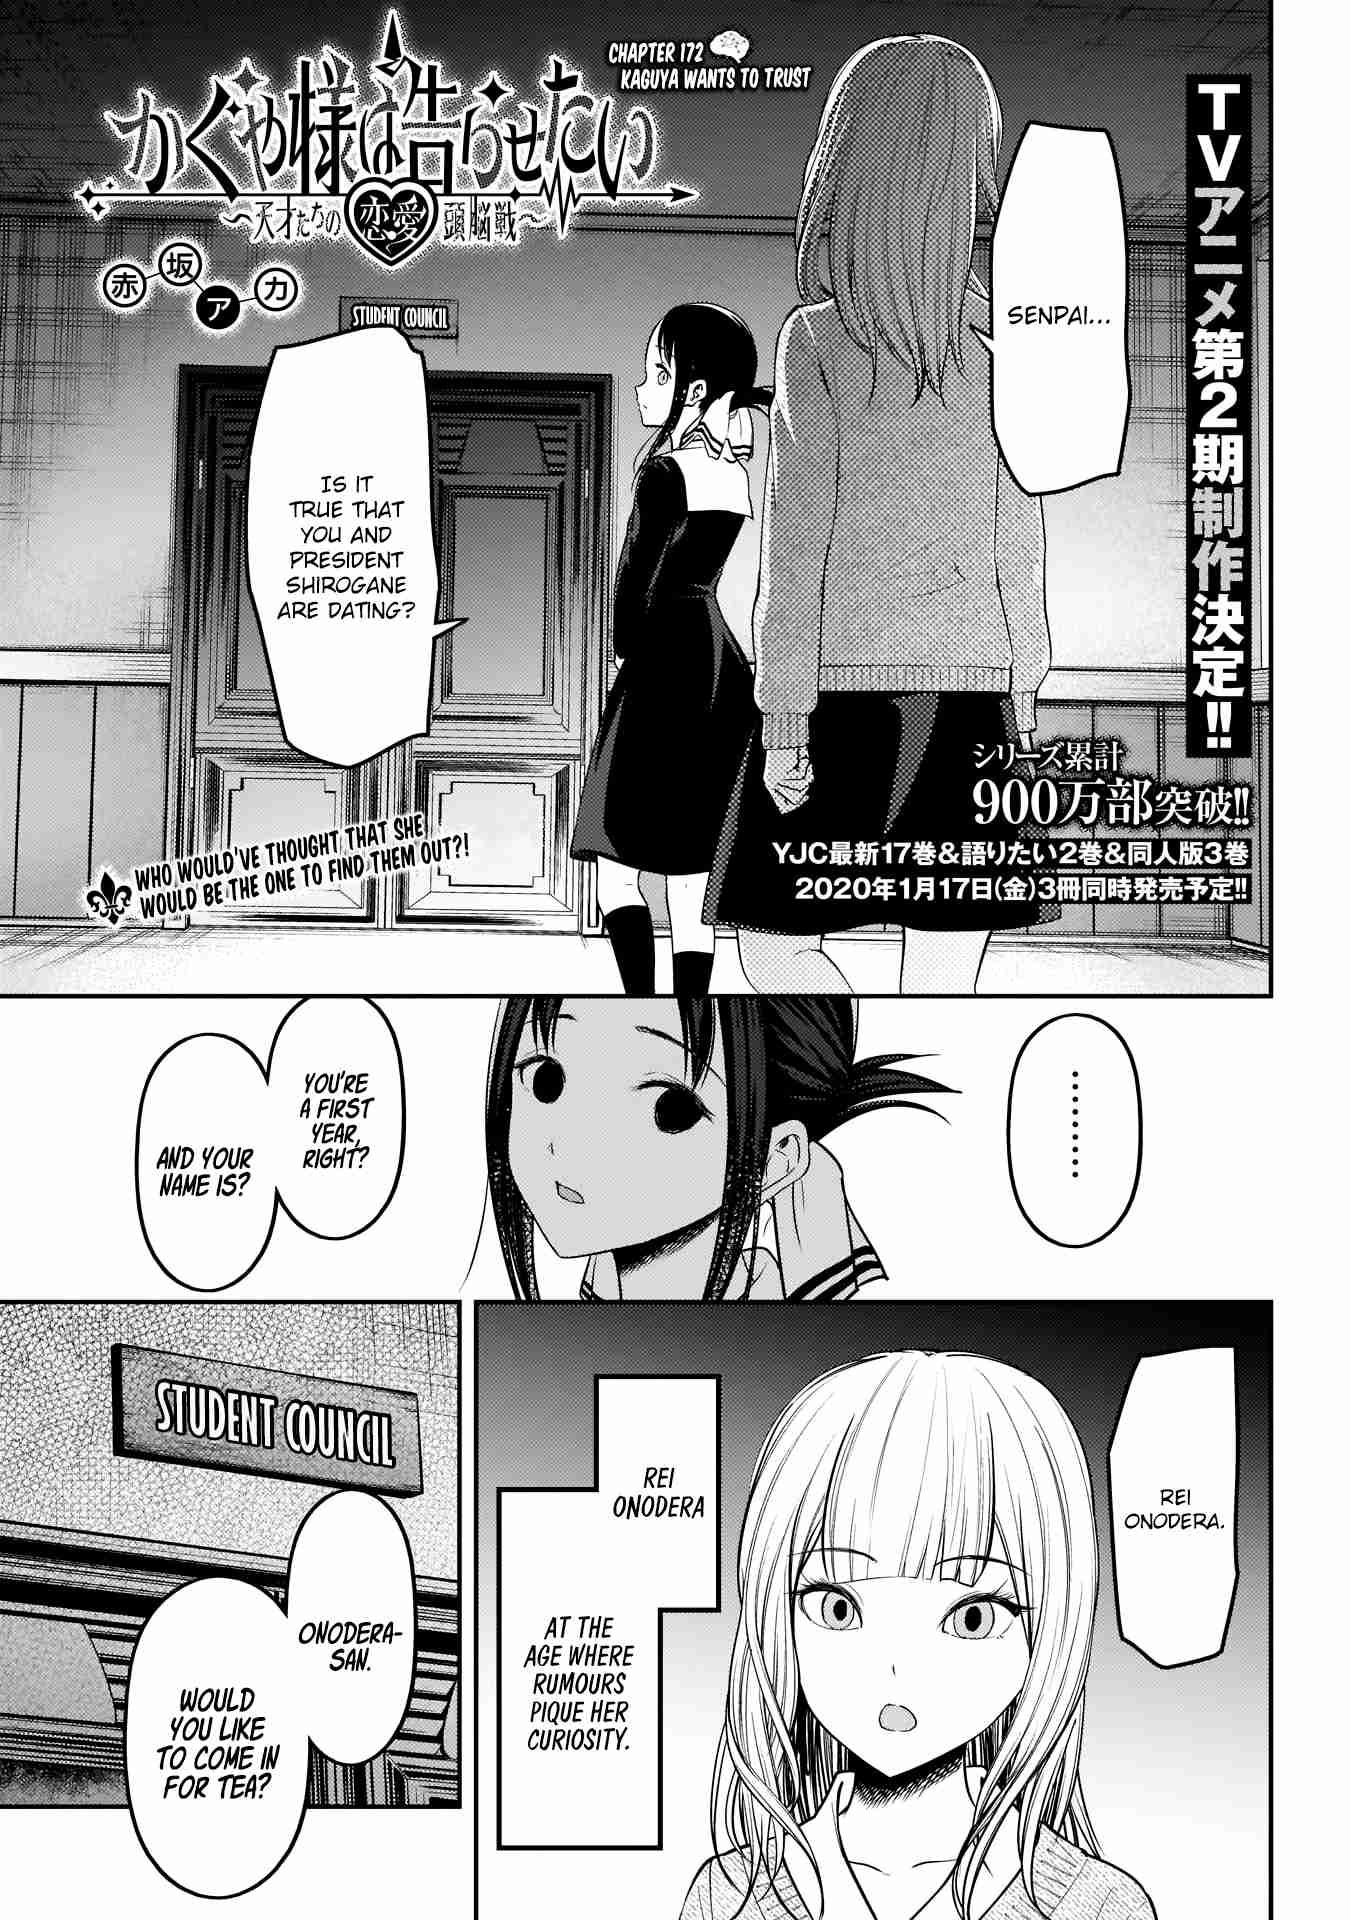 Kaguya Wants to be Confessed To: The Geniuses' War of Love and Brains Ch.172